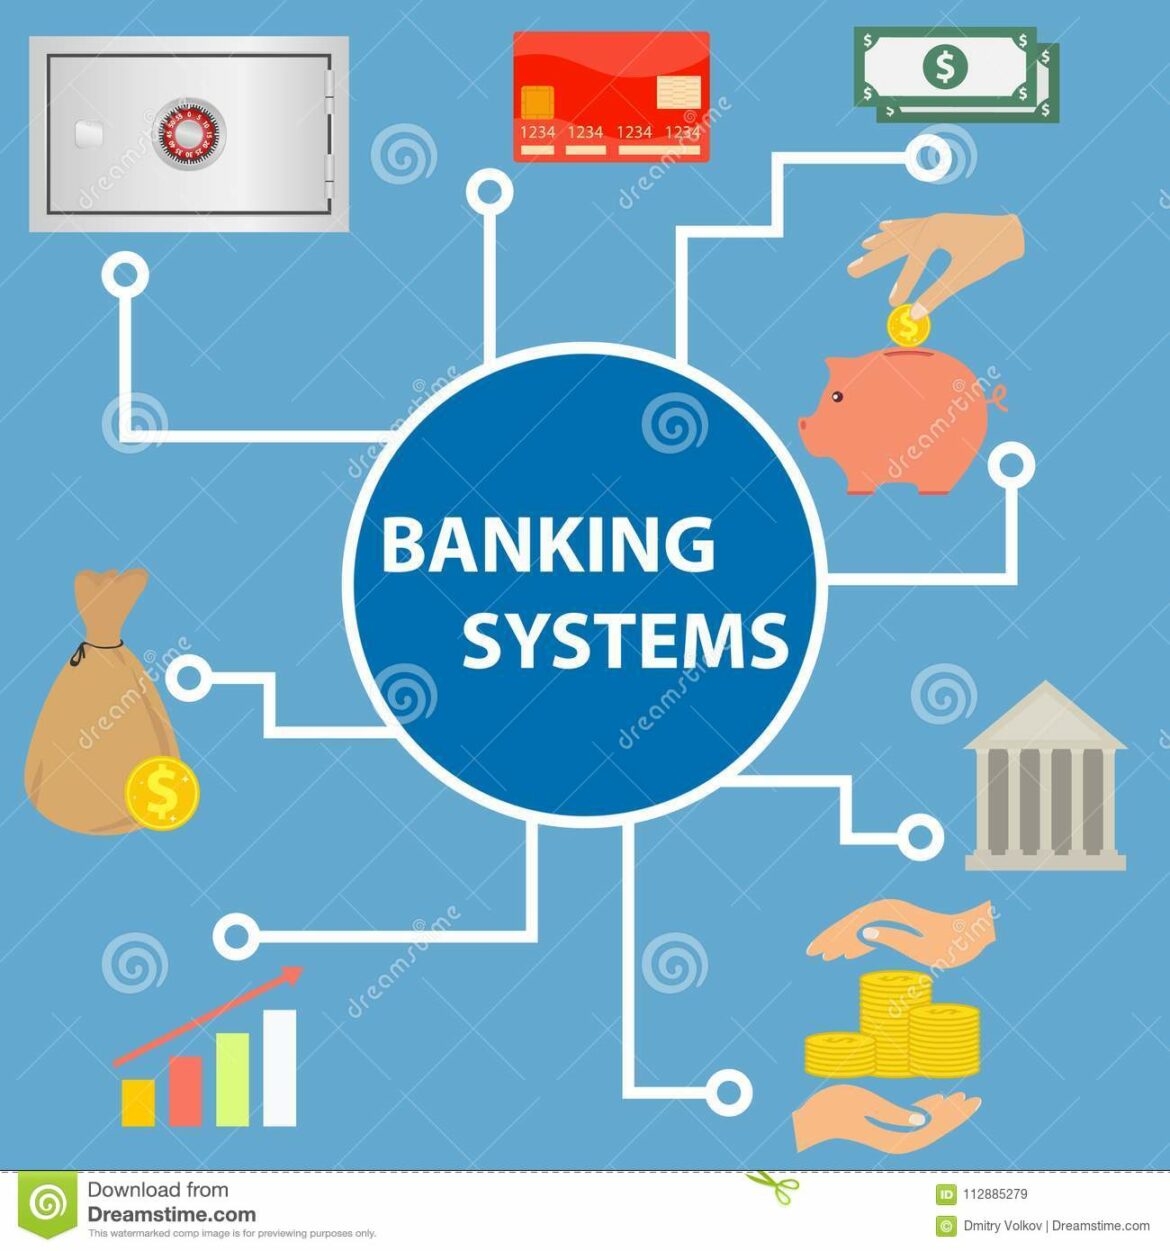 Banking system